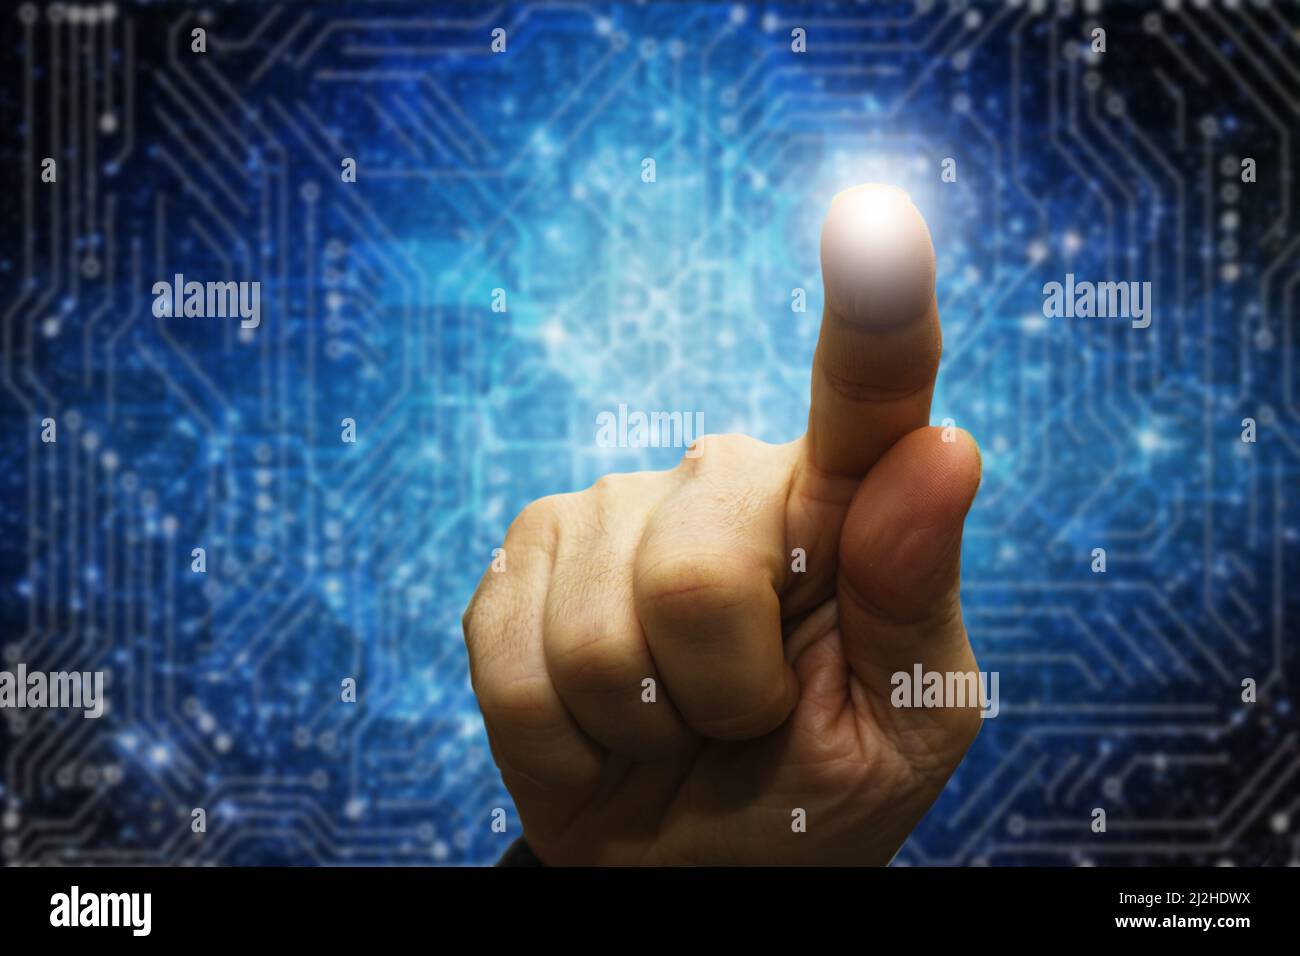 hand touching a screen with technology background Stock Photo